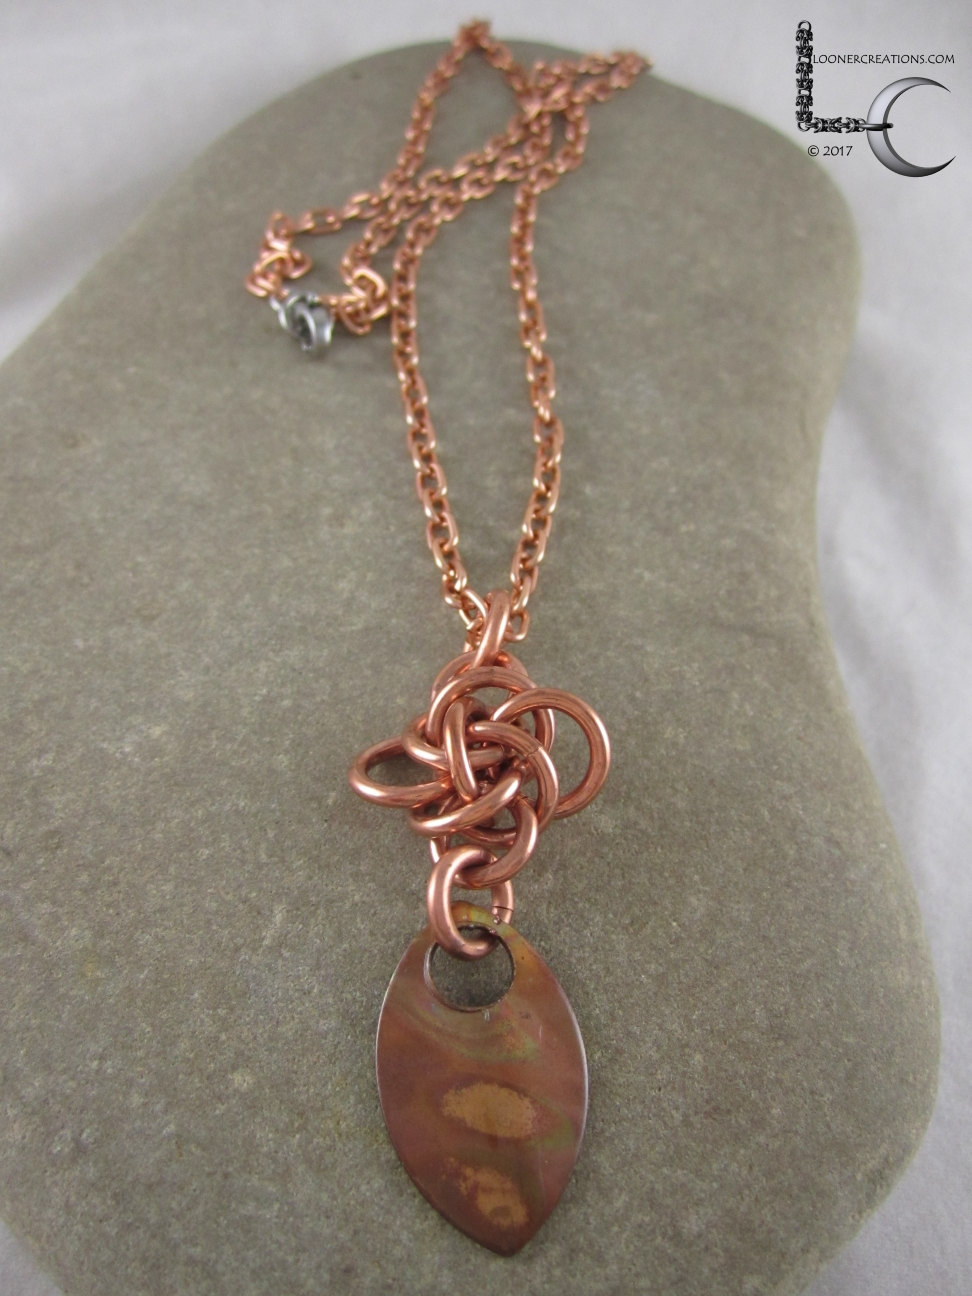 Copper Chainmail Persephone Square Knot Pendant Adjustable